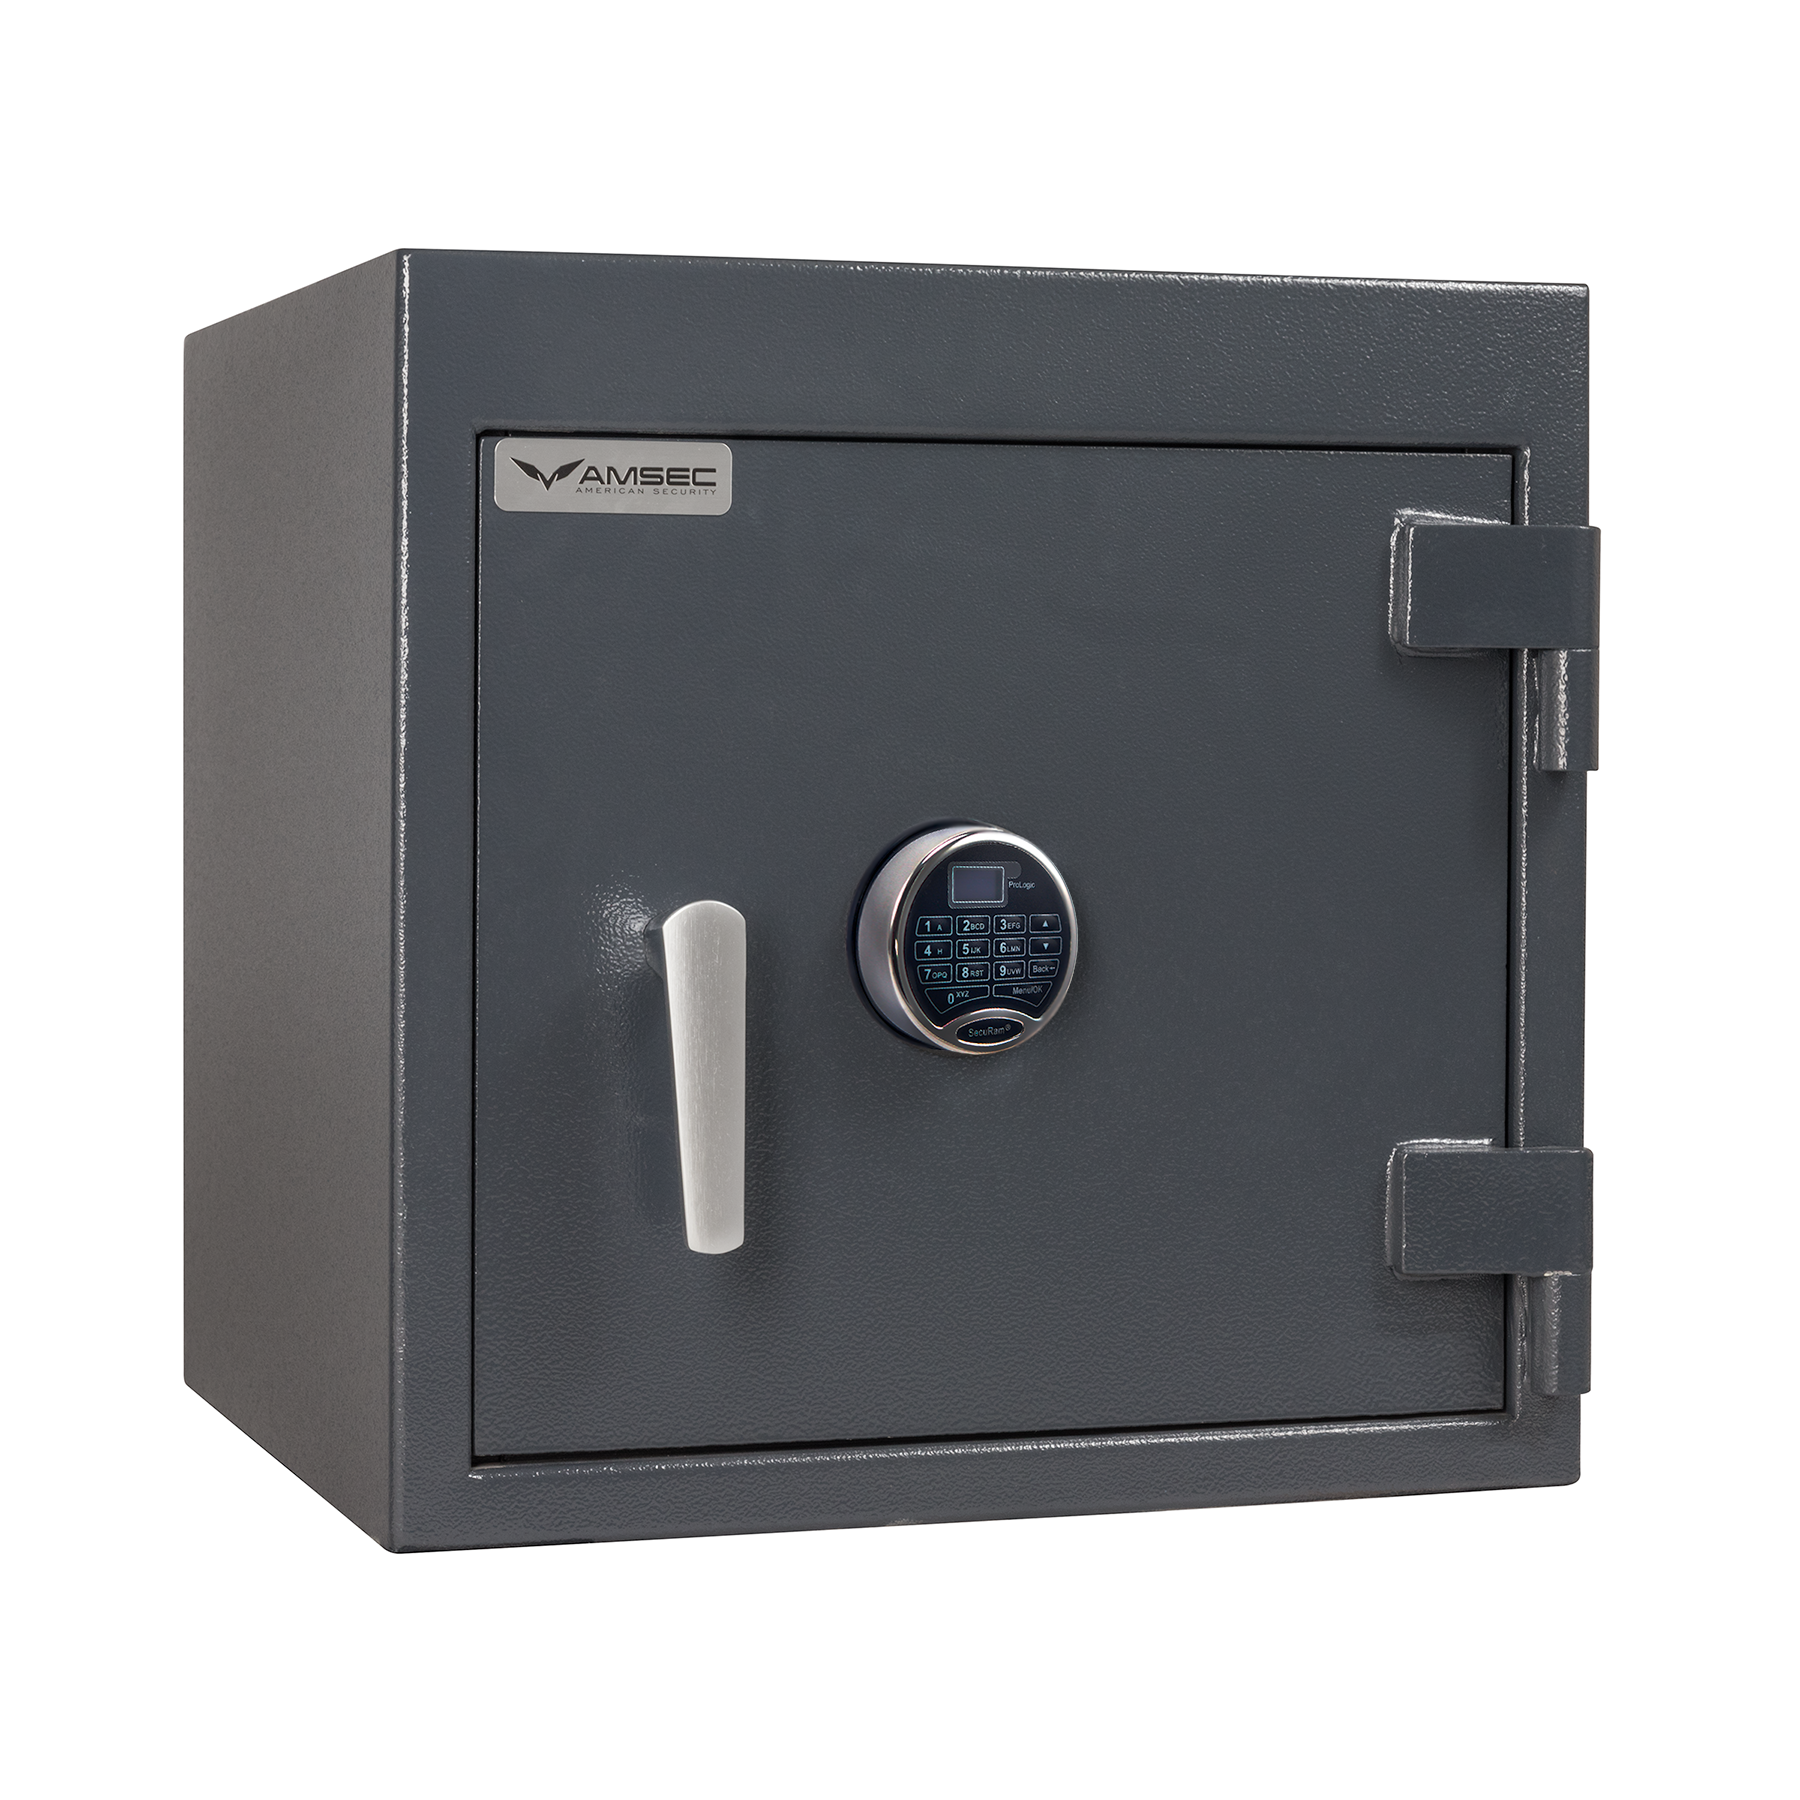 BWB-2020 Pharmacy Safe with Time Delay Lock